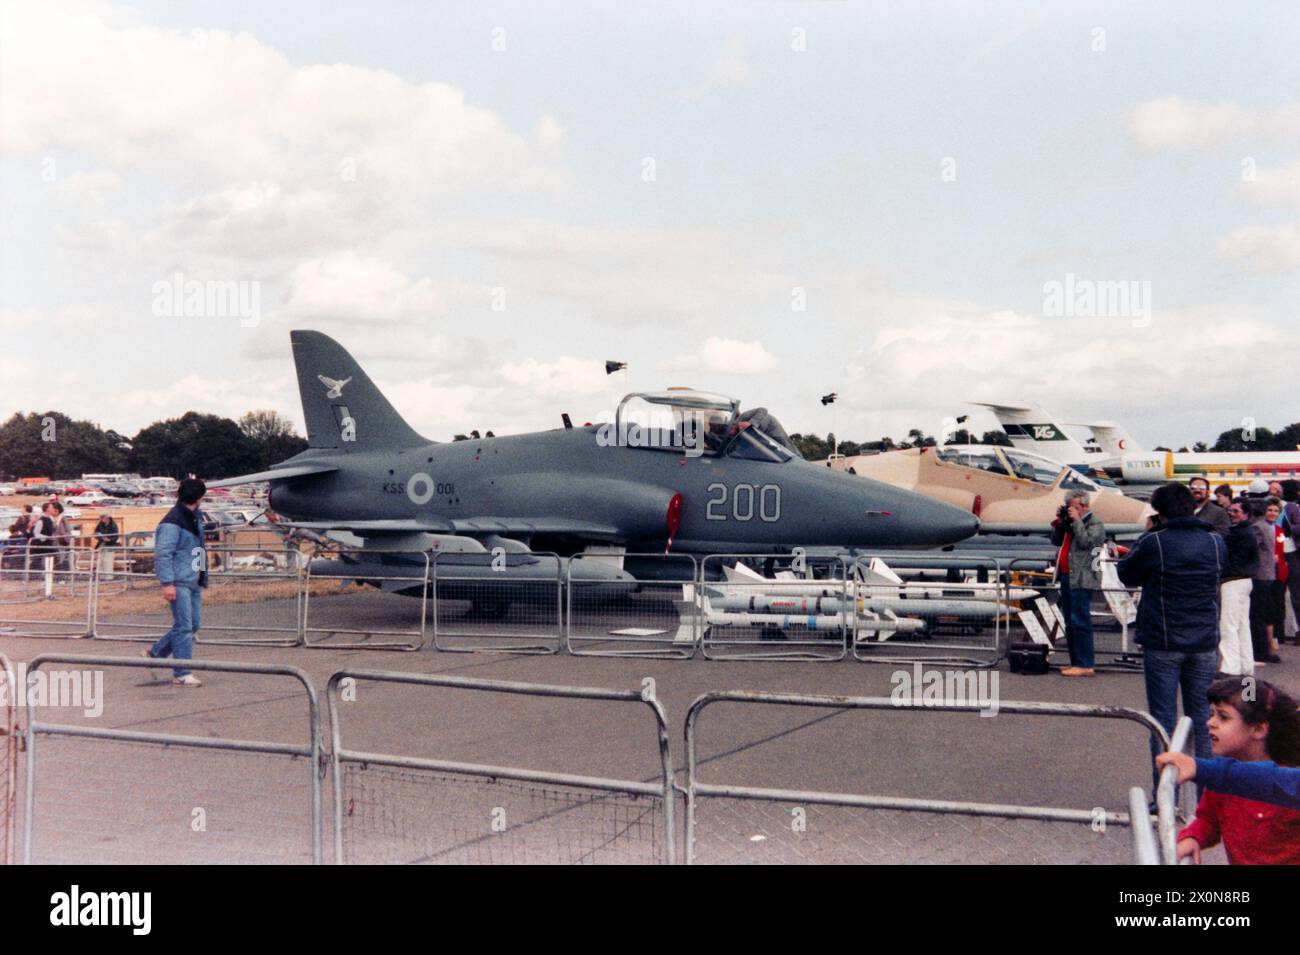 British Aerospace Hawk 200 mock-up serial KSS-001, full-scale mock-up for the Hawk 200 displayed at Farnborough International Airshow 1984 with an array of possible stores. The Hawk 200 was a development of a combat-orientated variant of the Hawk trainer aircraft, with the first flying in 1986 and entered service with first customer Royal Air Force of Oman in 1993 Stock Photo